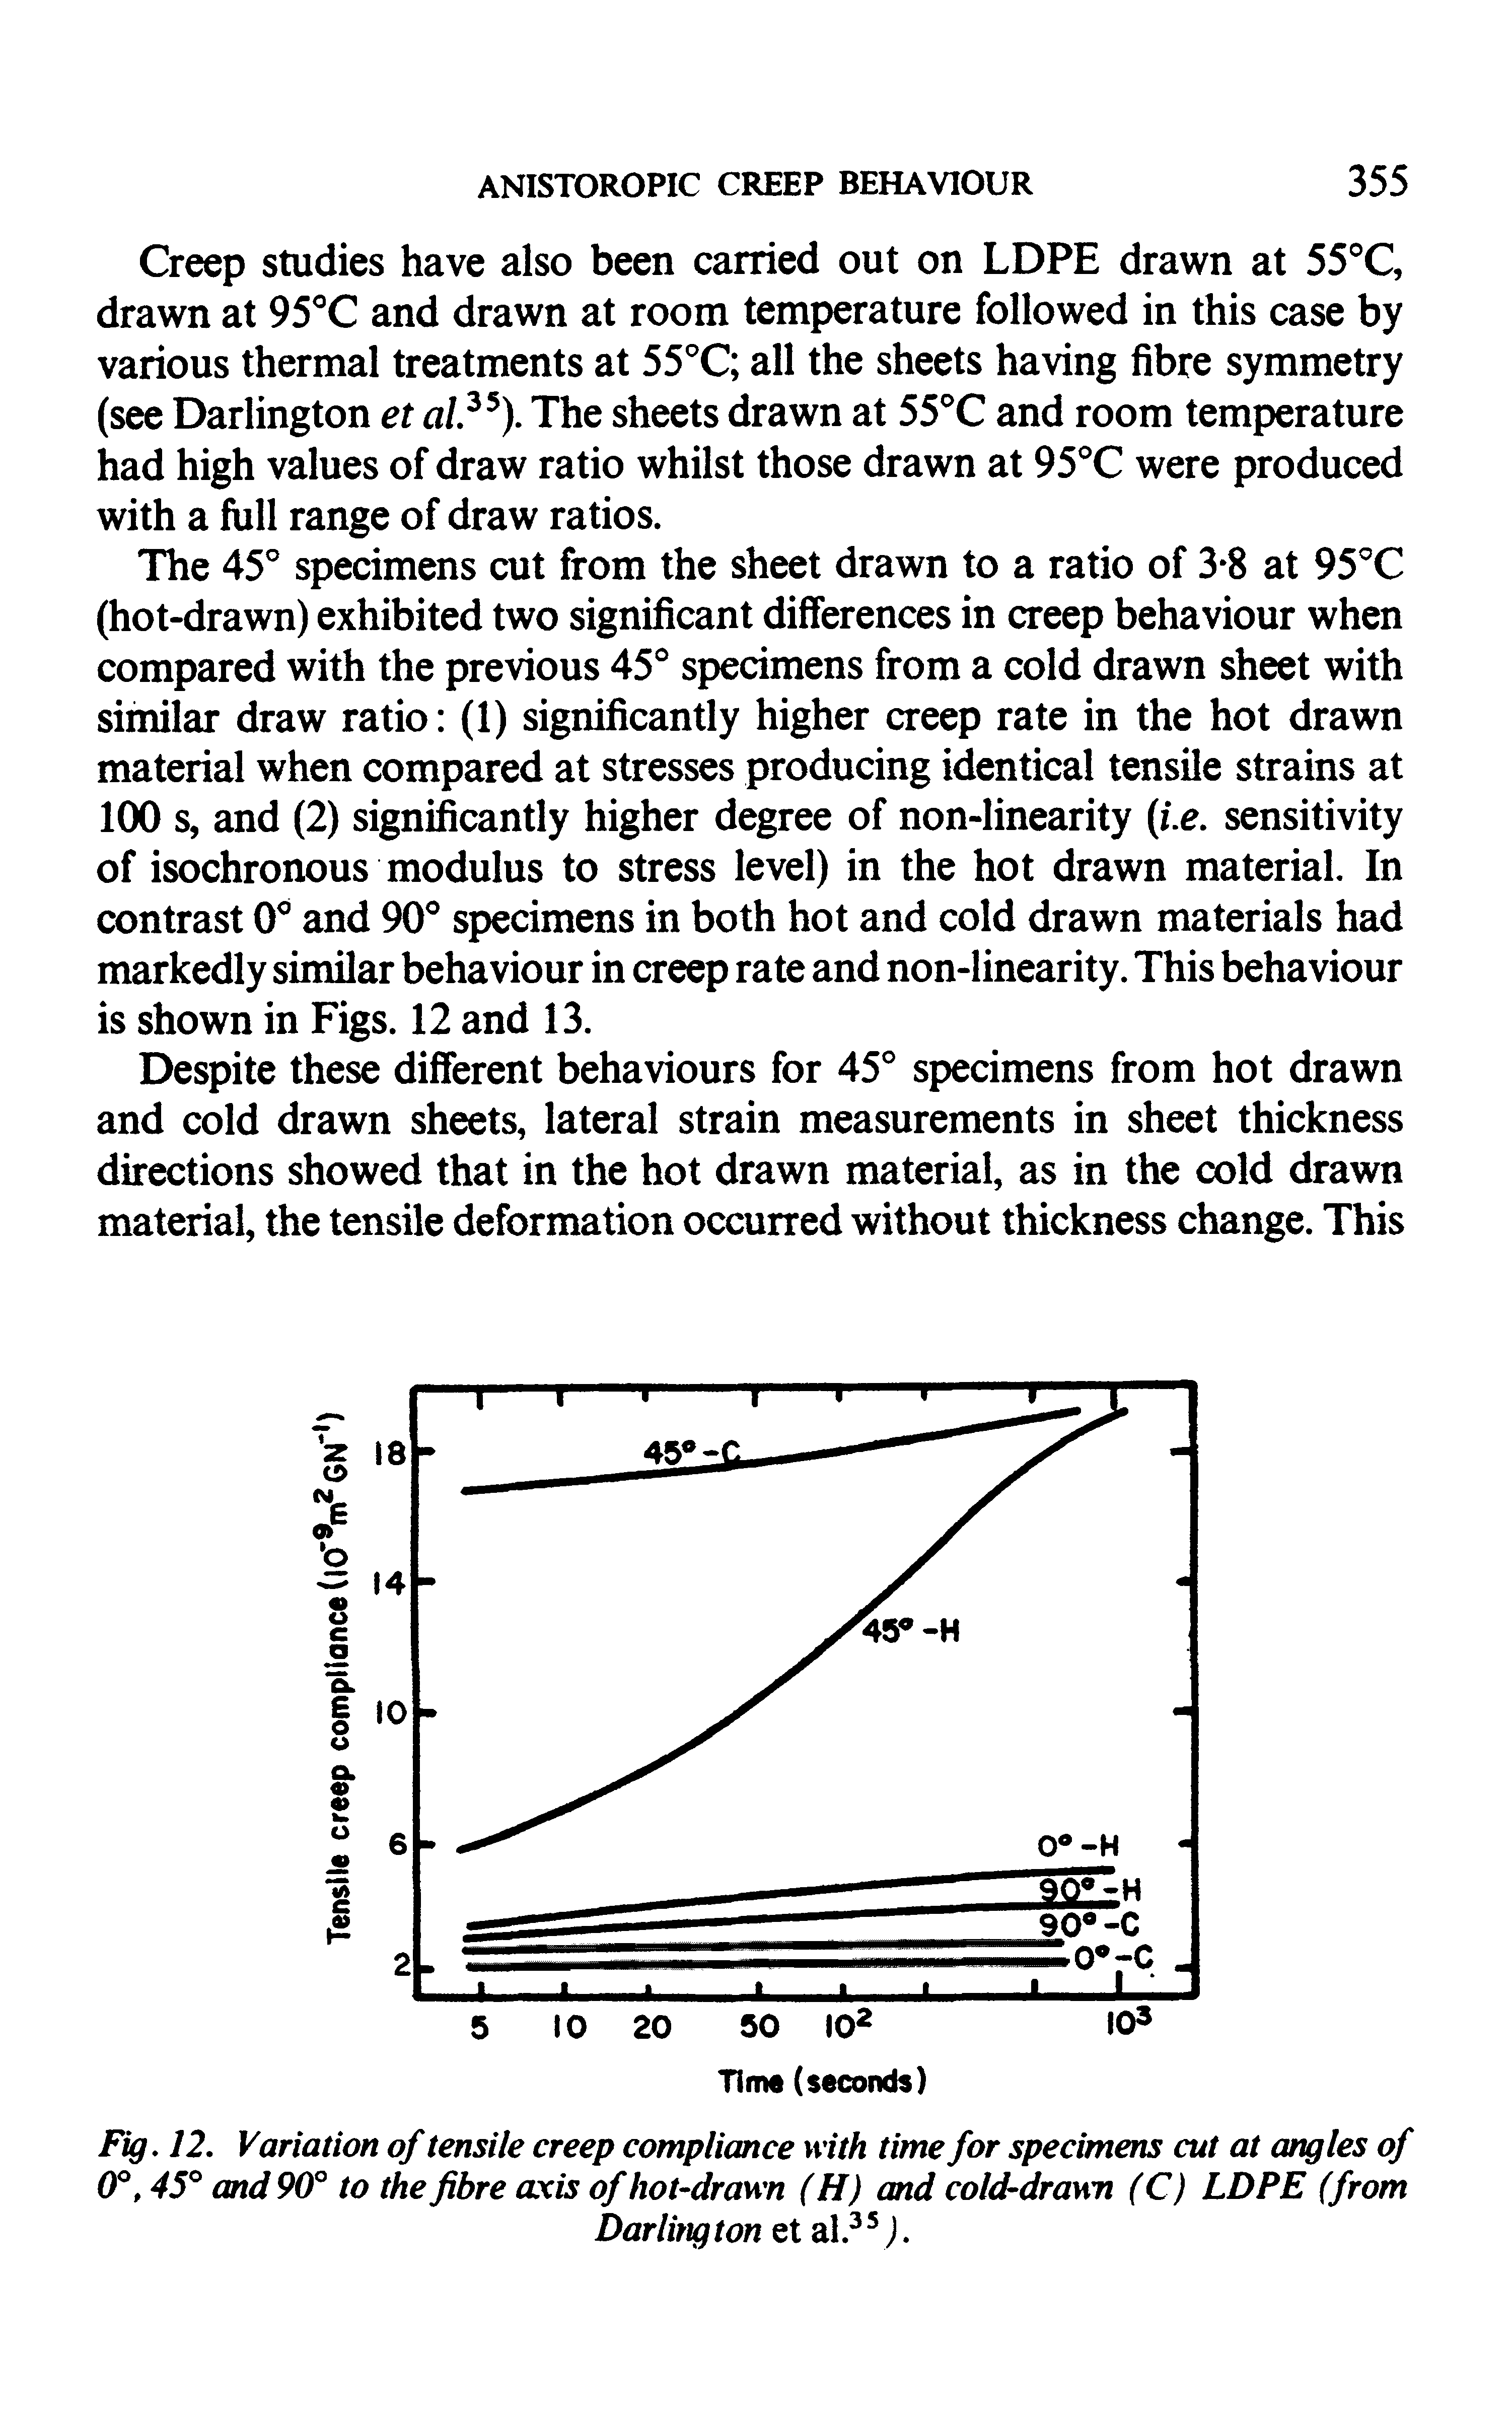 Fig. 12. Variation of tensile creep compliance with time for specimens cut at armies of 0°, 45° and 90° to the fibre axis of hot-drawn (H) and cold-drawn (C) LDPE (from...